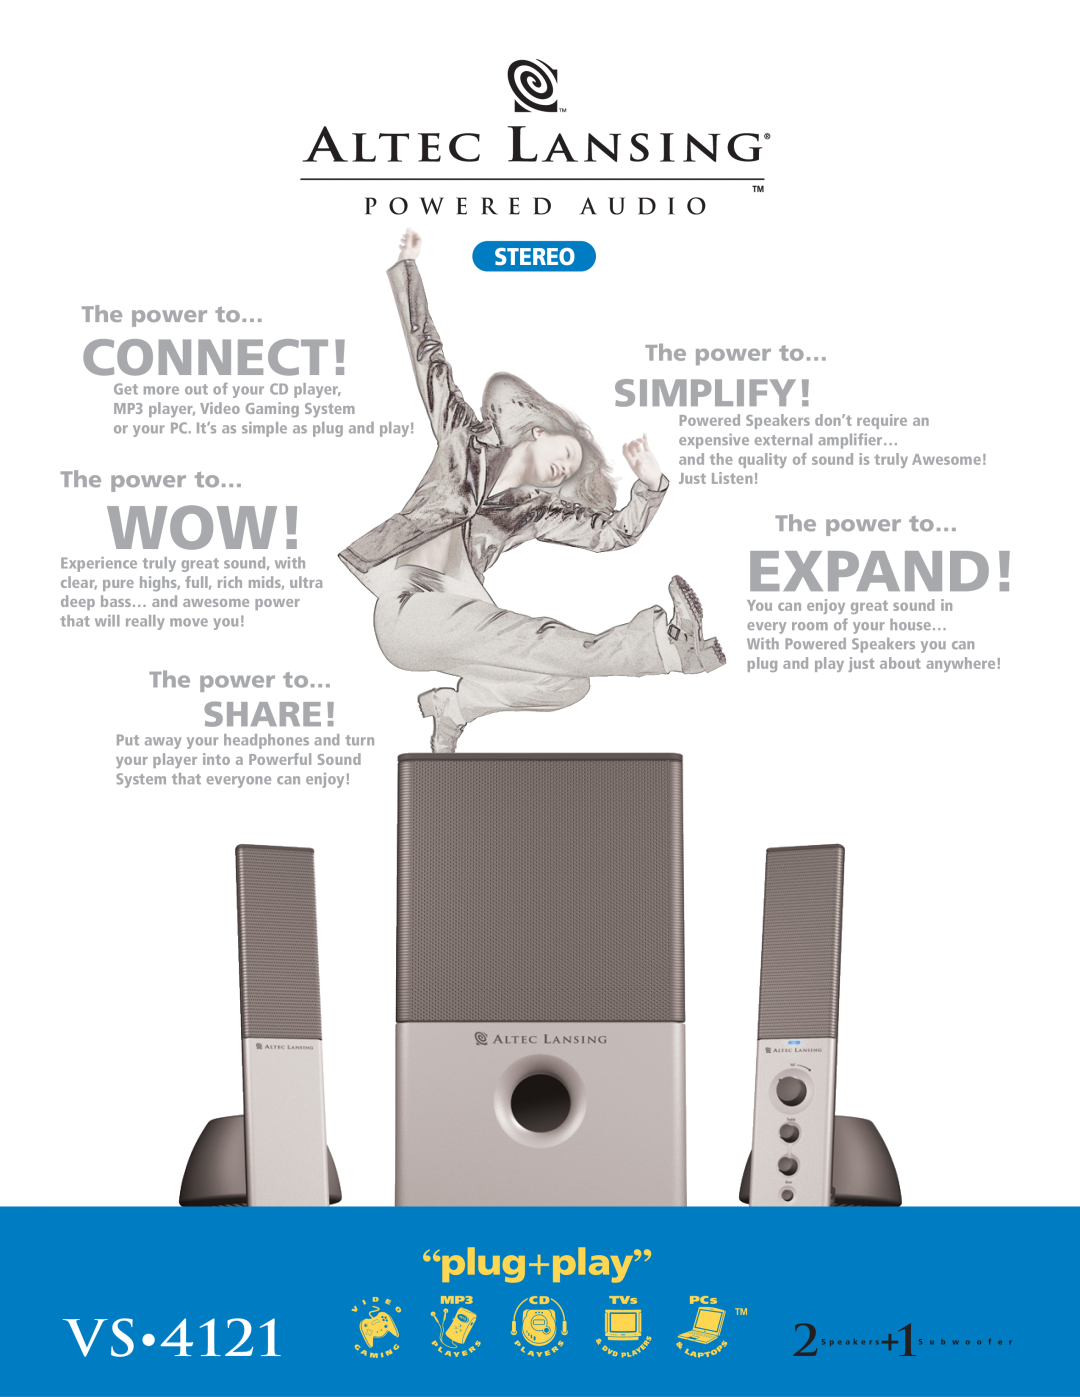 Altec Lansing VS-4121 manual Expand, Connect, VS4121, Simplify, Share, Stereo, P O W E R E D A U D I O, The power to… 